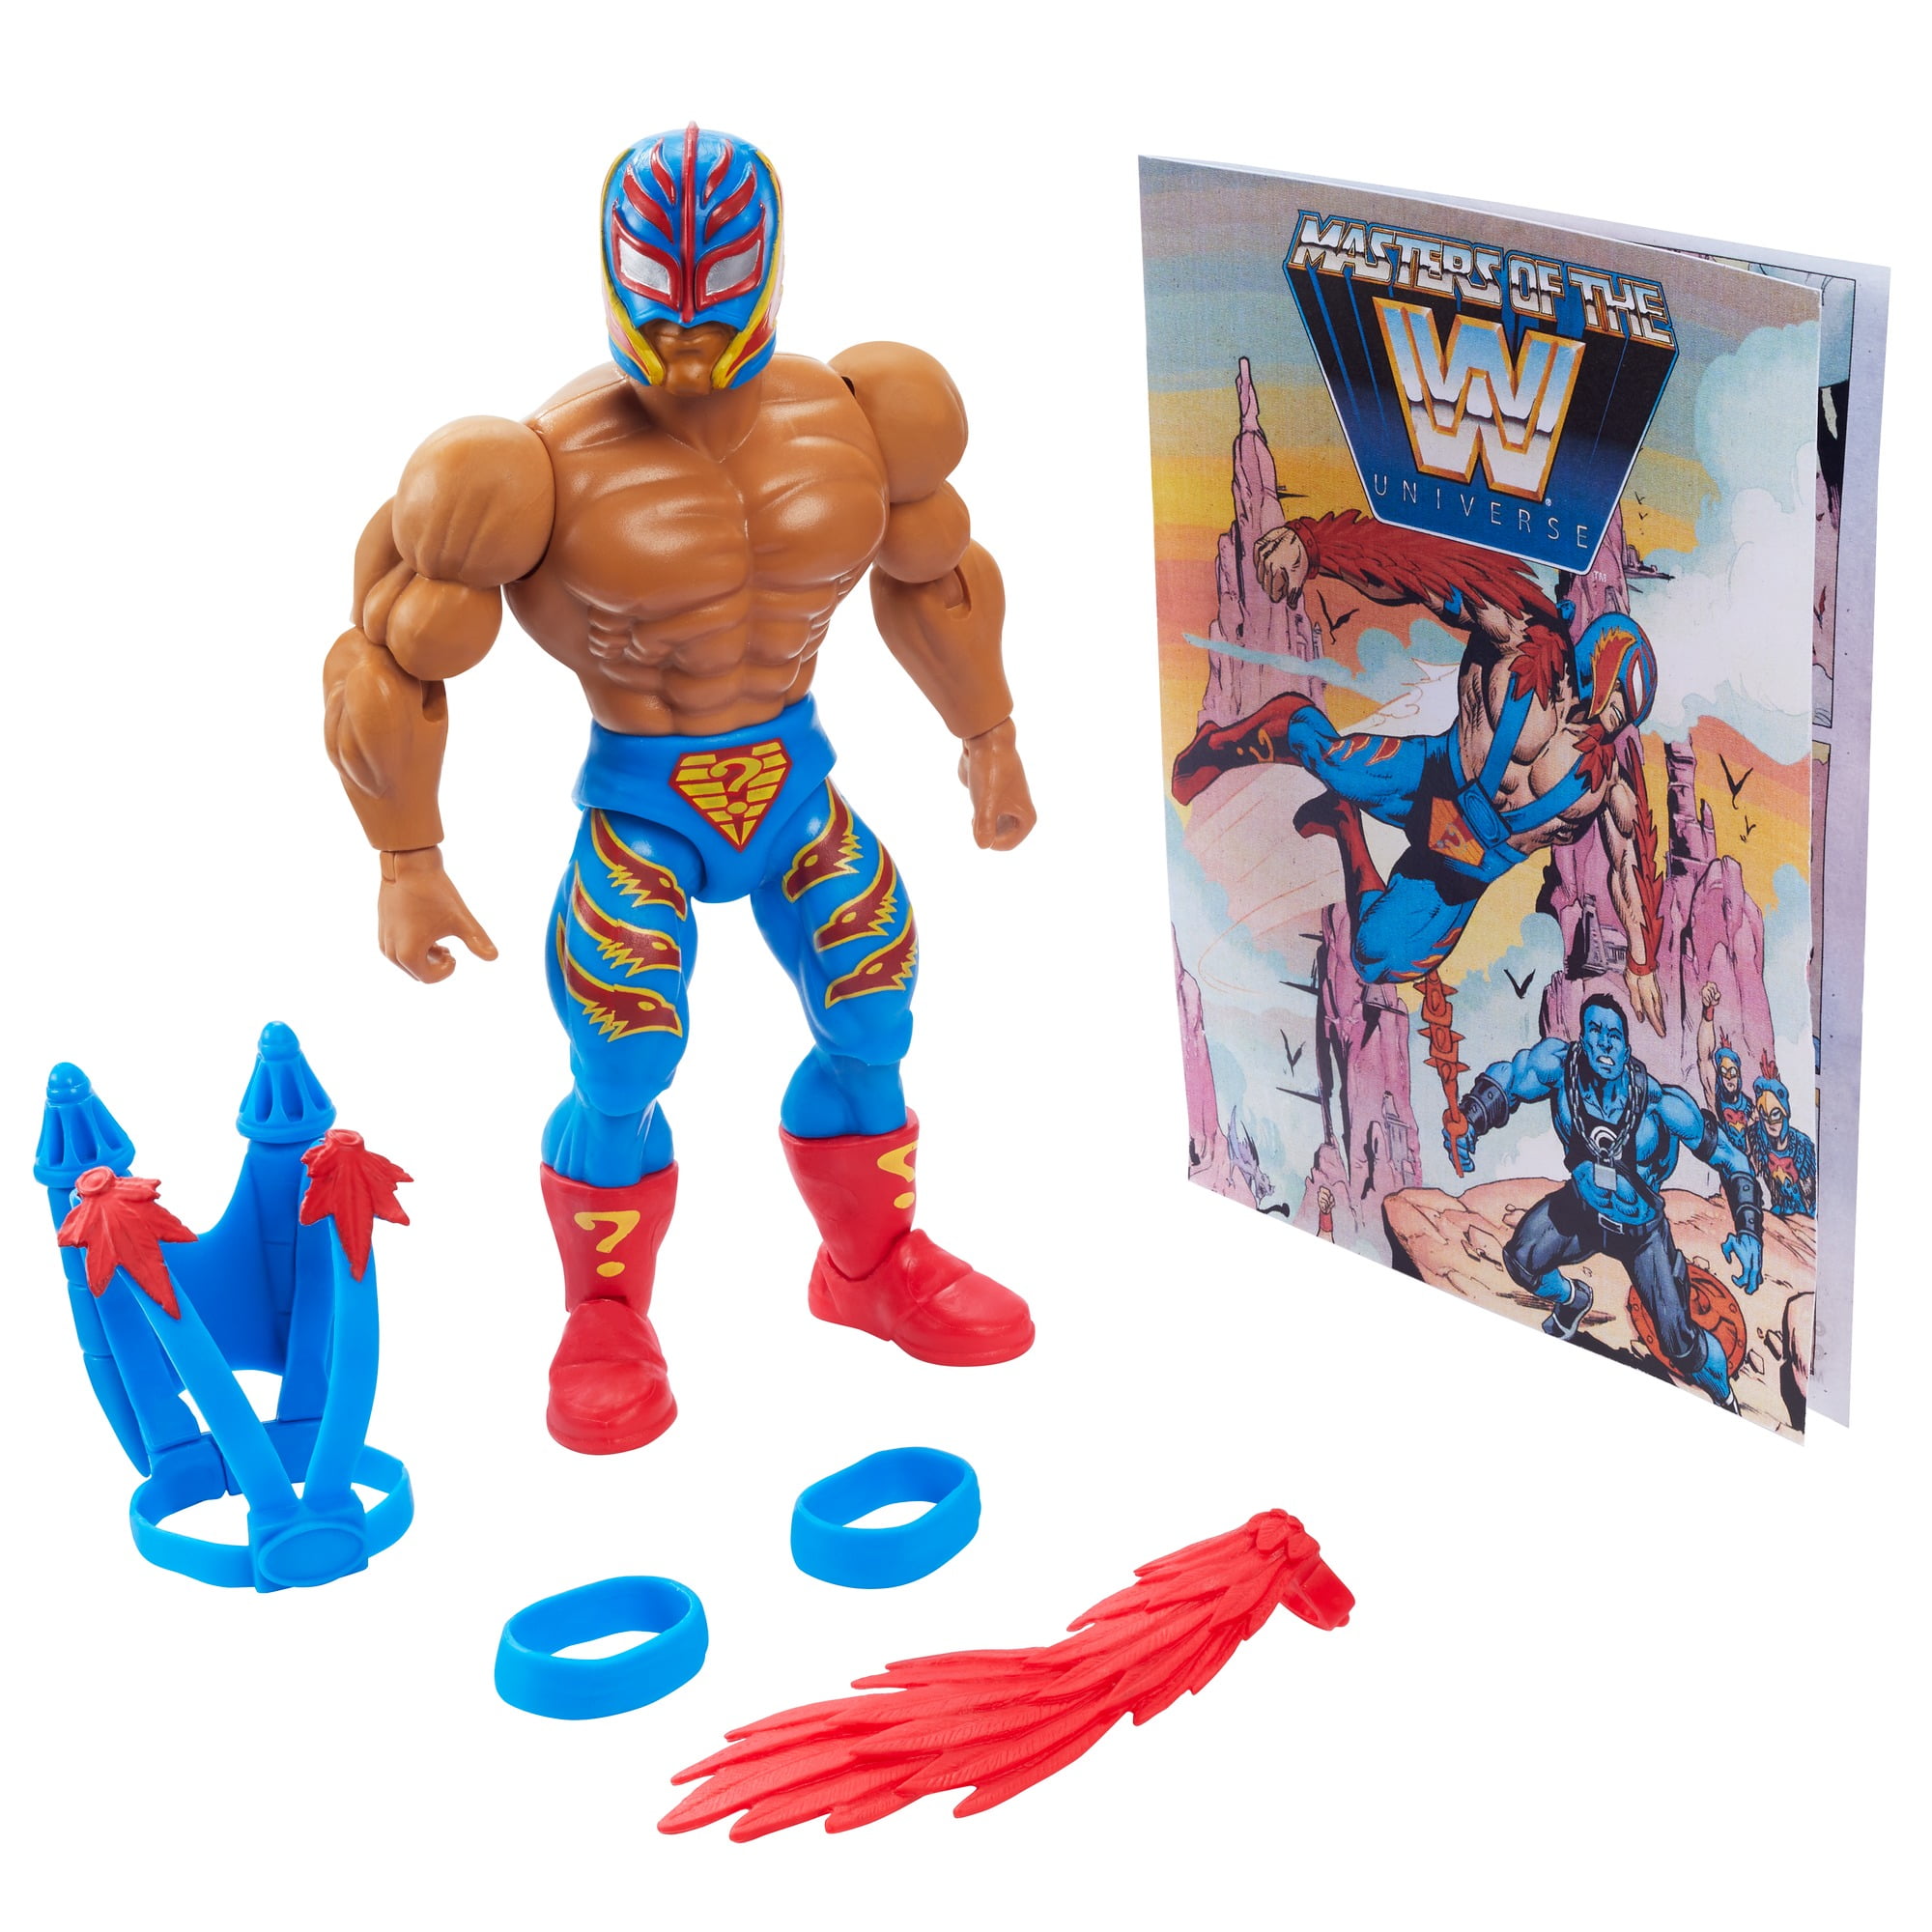 Wwe masters of the universe rey mysterio 